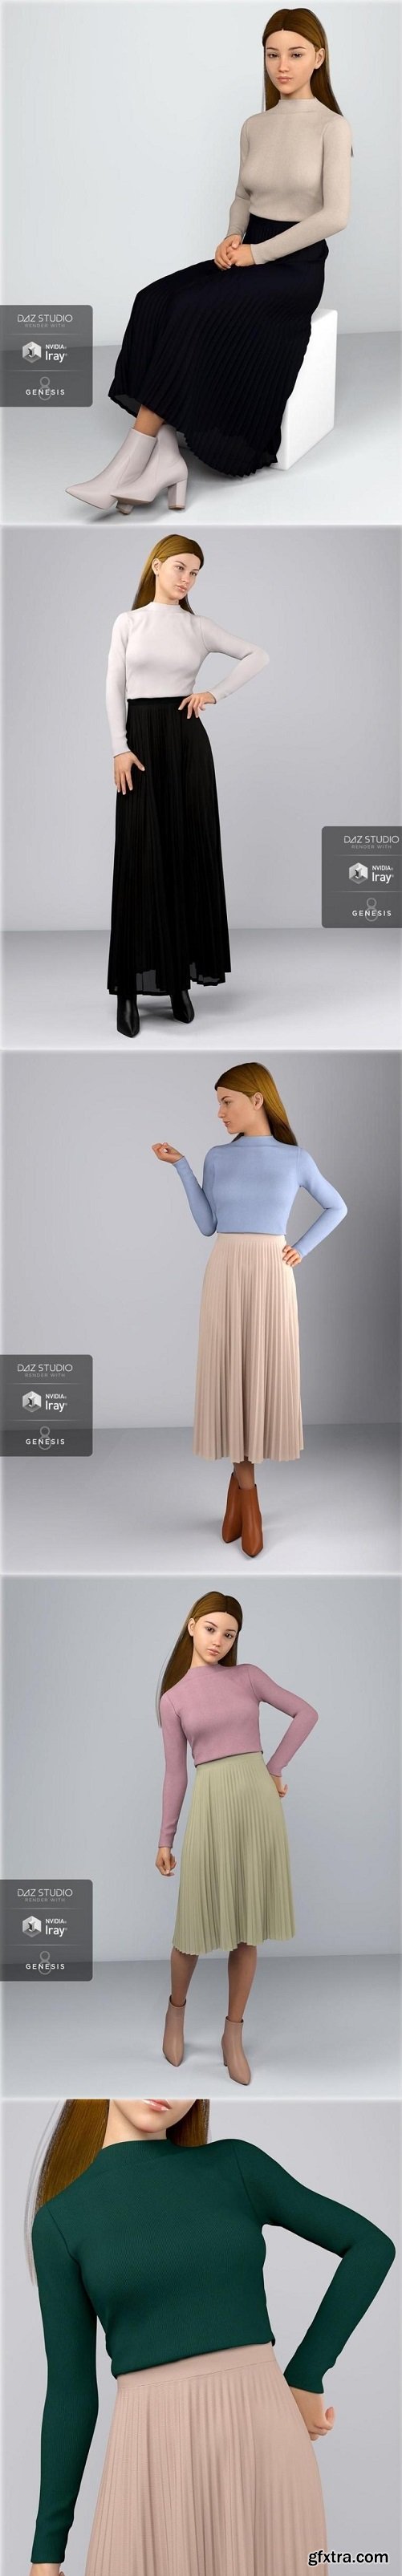 dForce HnC Pleated Skirt Outfit for Genesis 8 Females